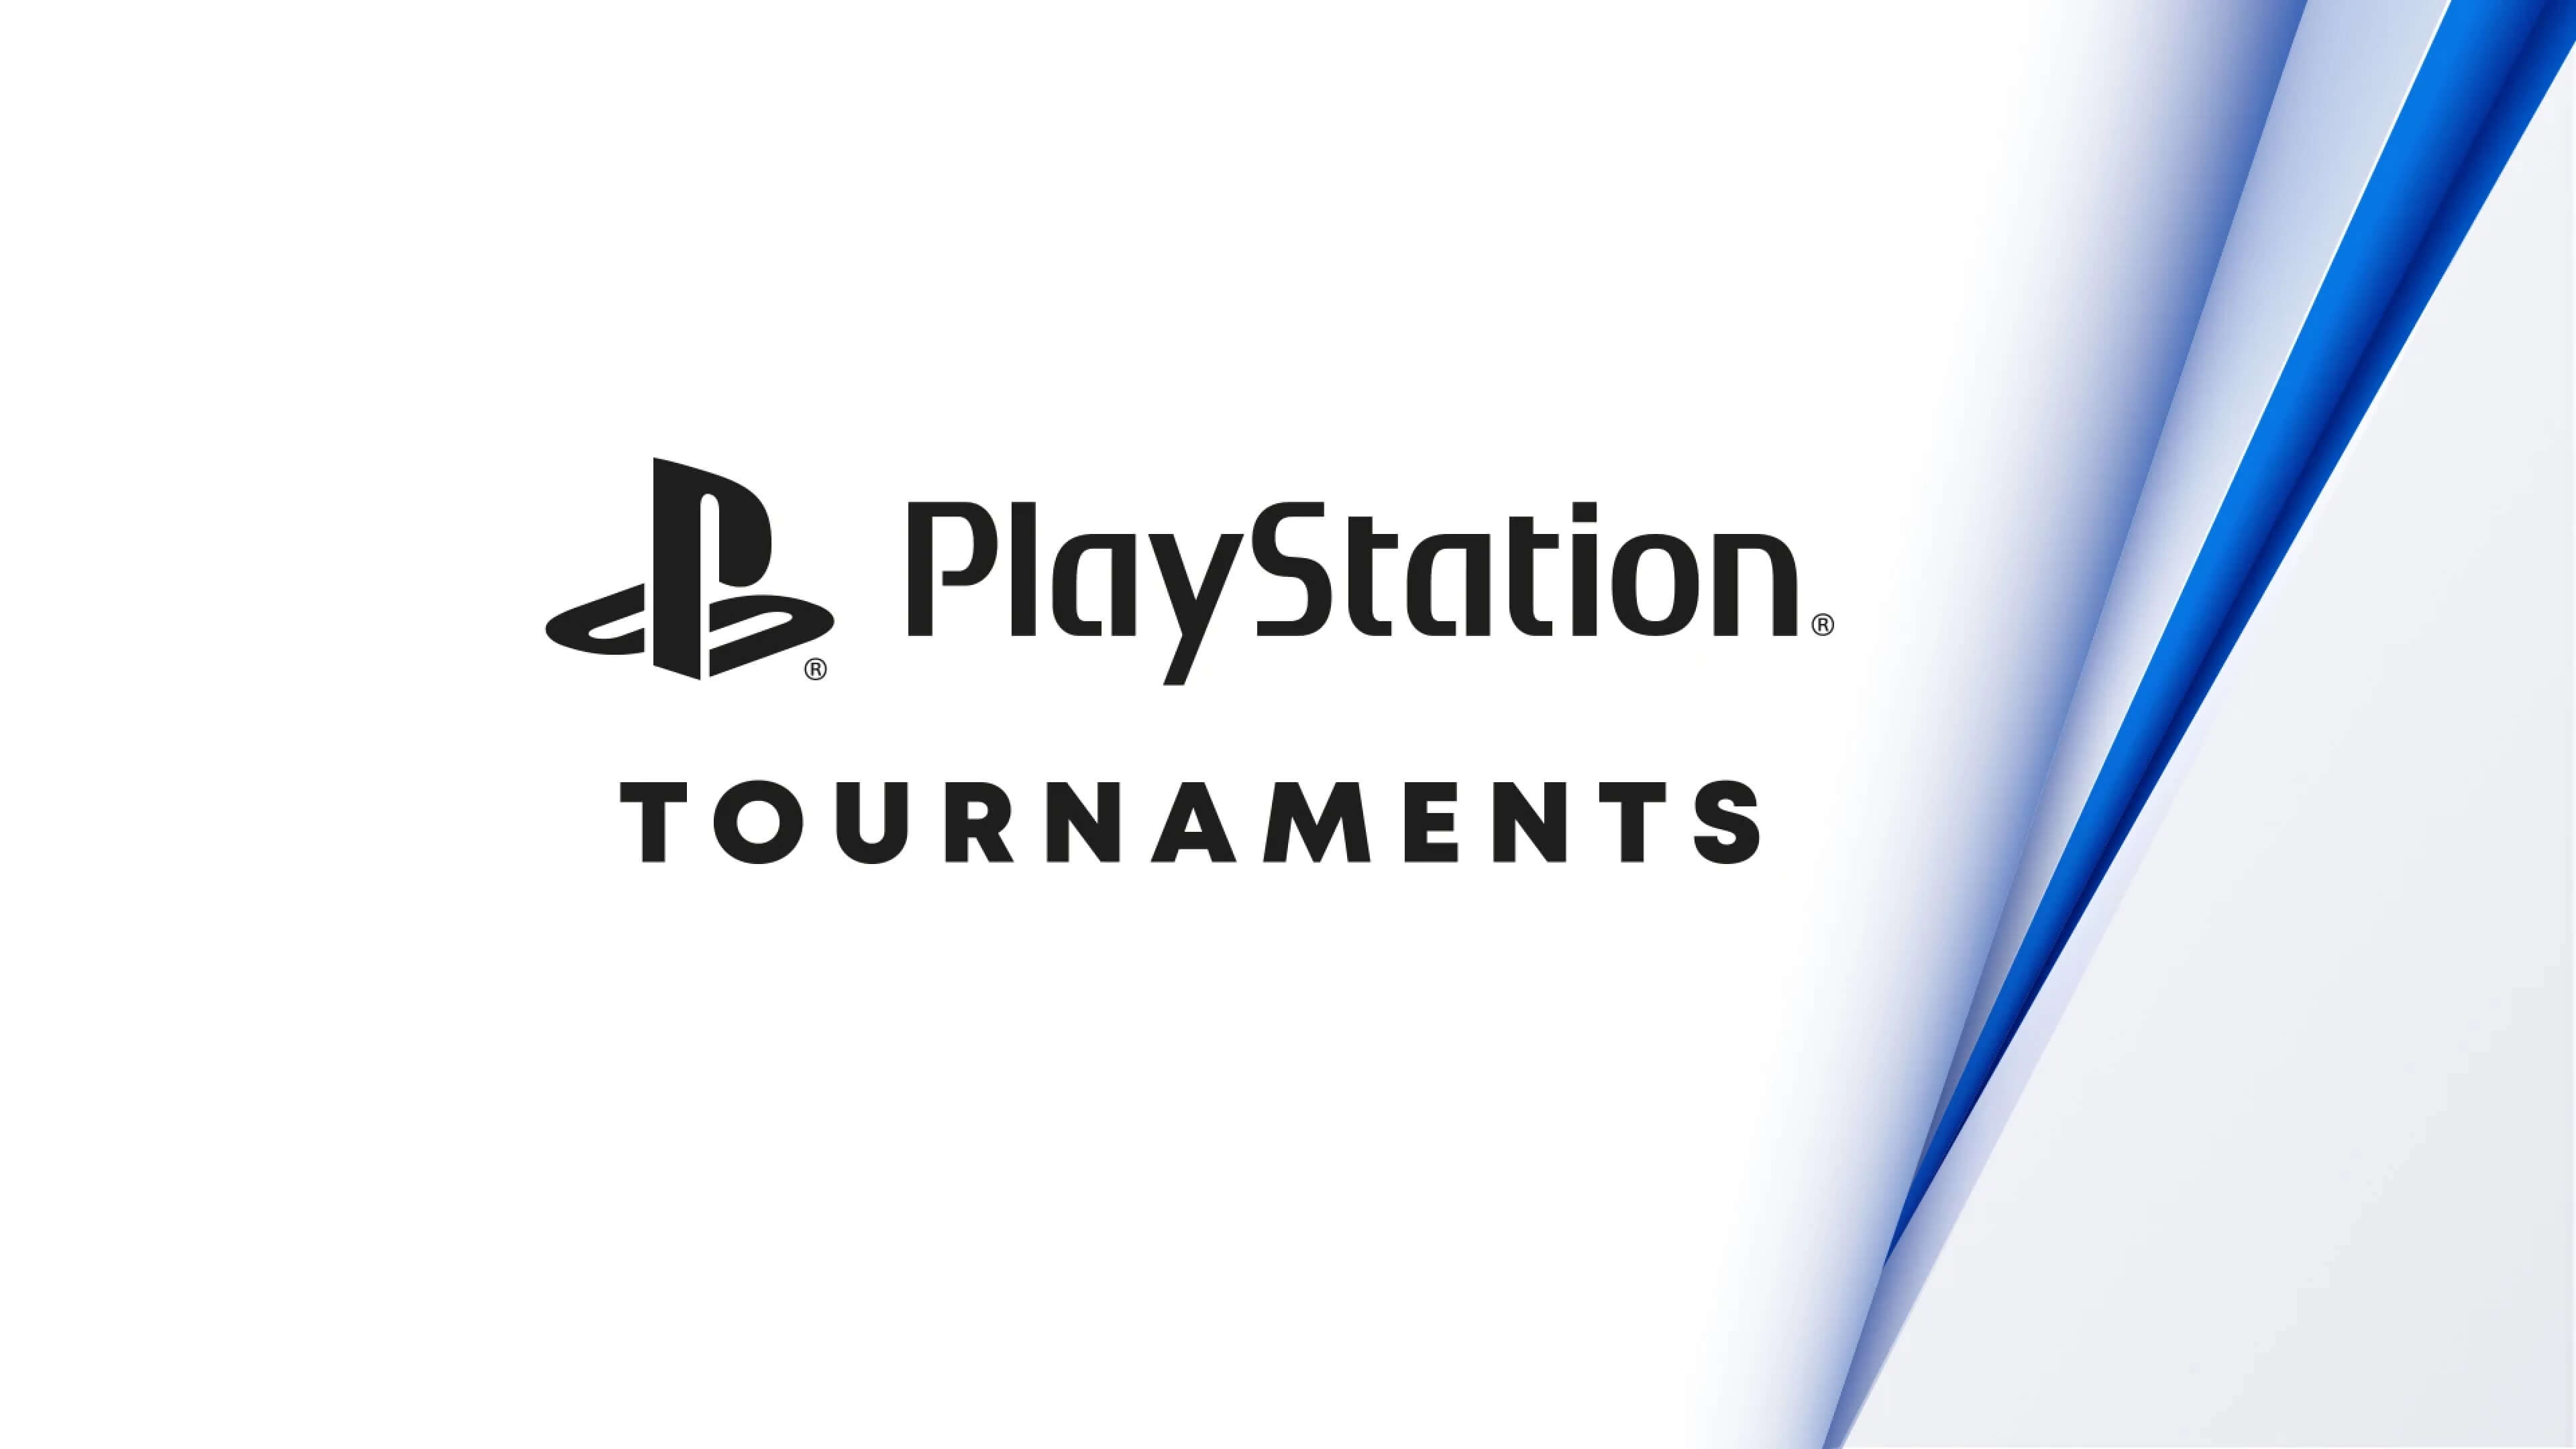 Dragon Ball Fighter Z Free $100 PSN Tournament (Aug 8) - Overview